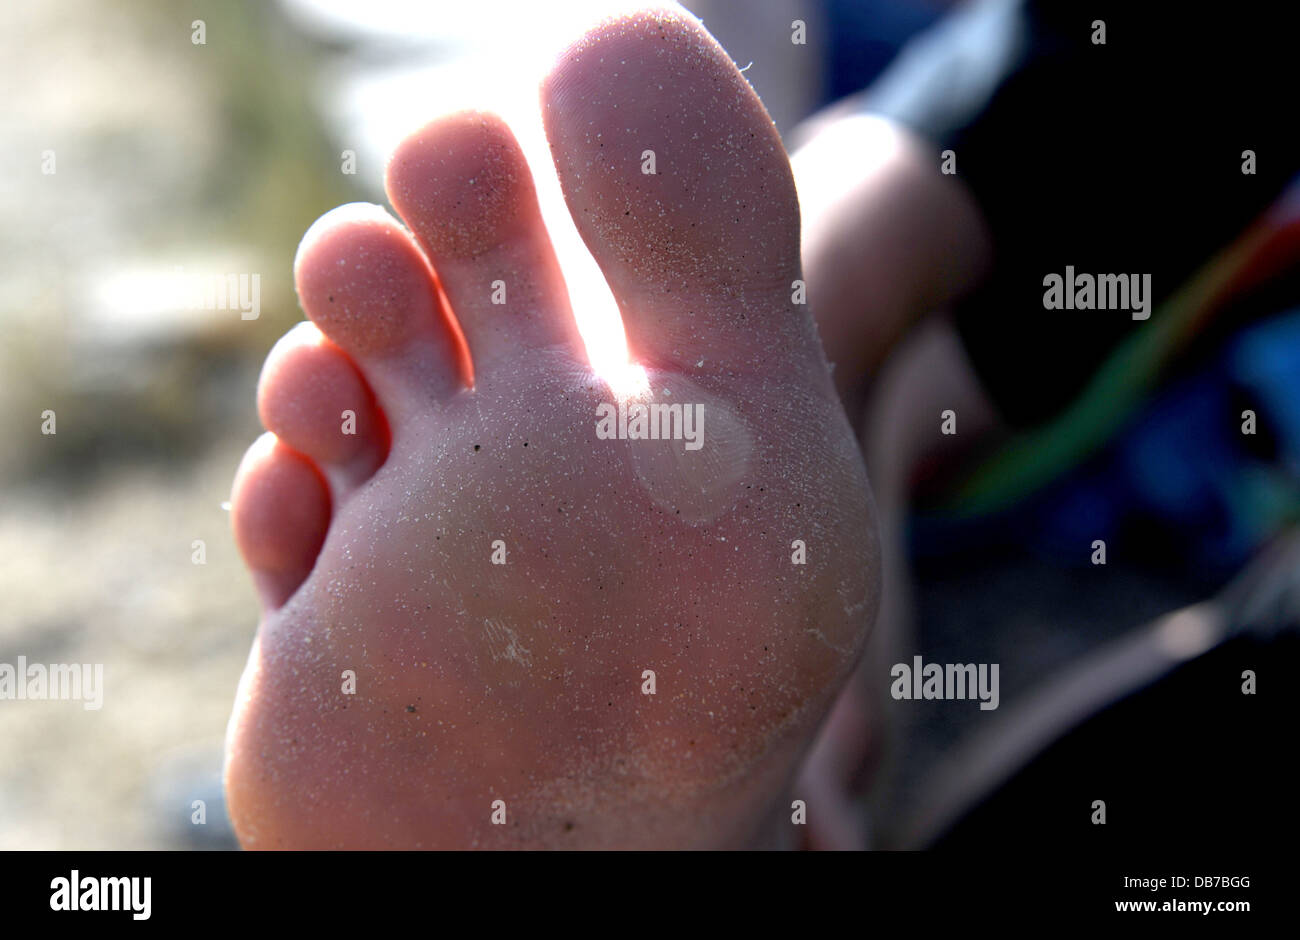 https://c8.alamy.com/comp/DB7BGG/young-woman-with-blisters-on-the-soles-or-bottoms-of-her-feet-DB7BGG.jpg